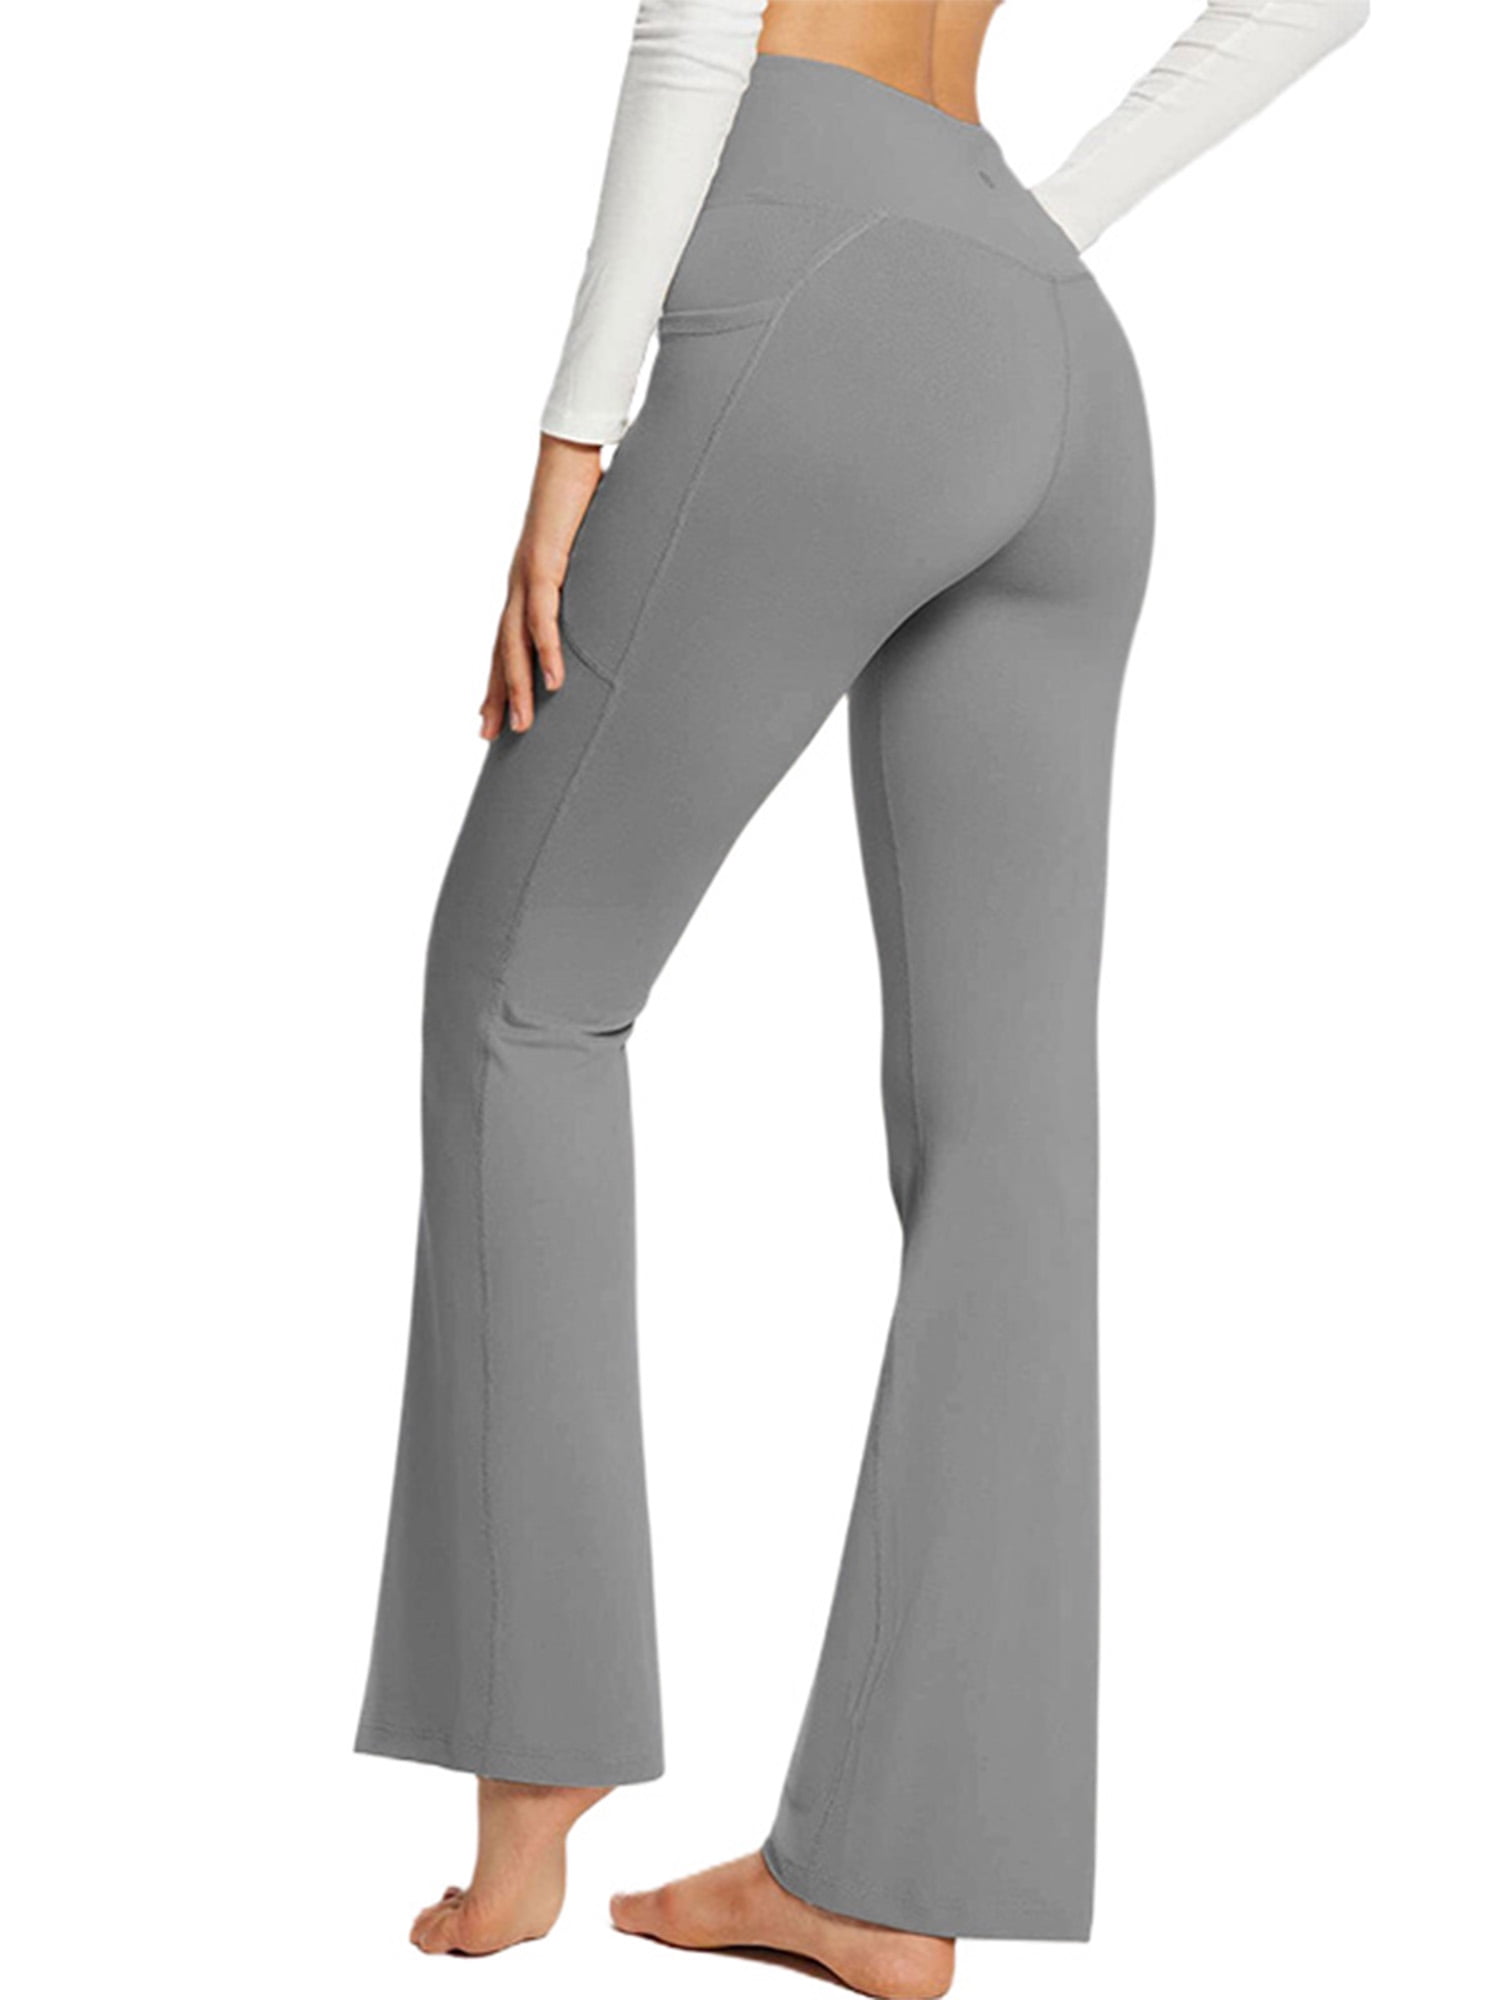 Frontwalk High Waisted Leggings for Women Yoga Workout Biker Athletic Pant  Fitness Jogger Compression Tights with Pocket Light Gray L